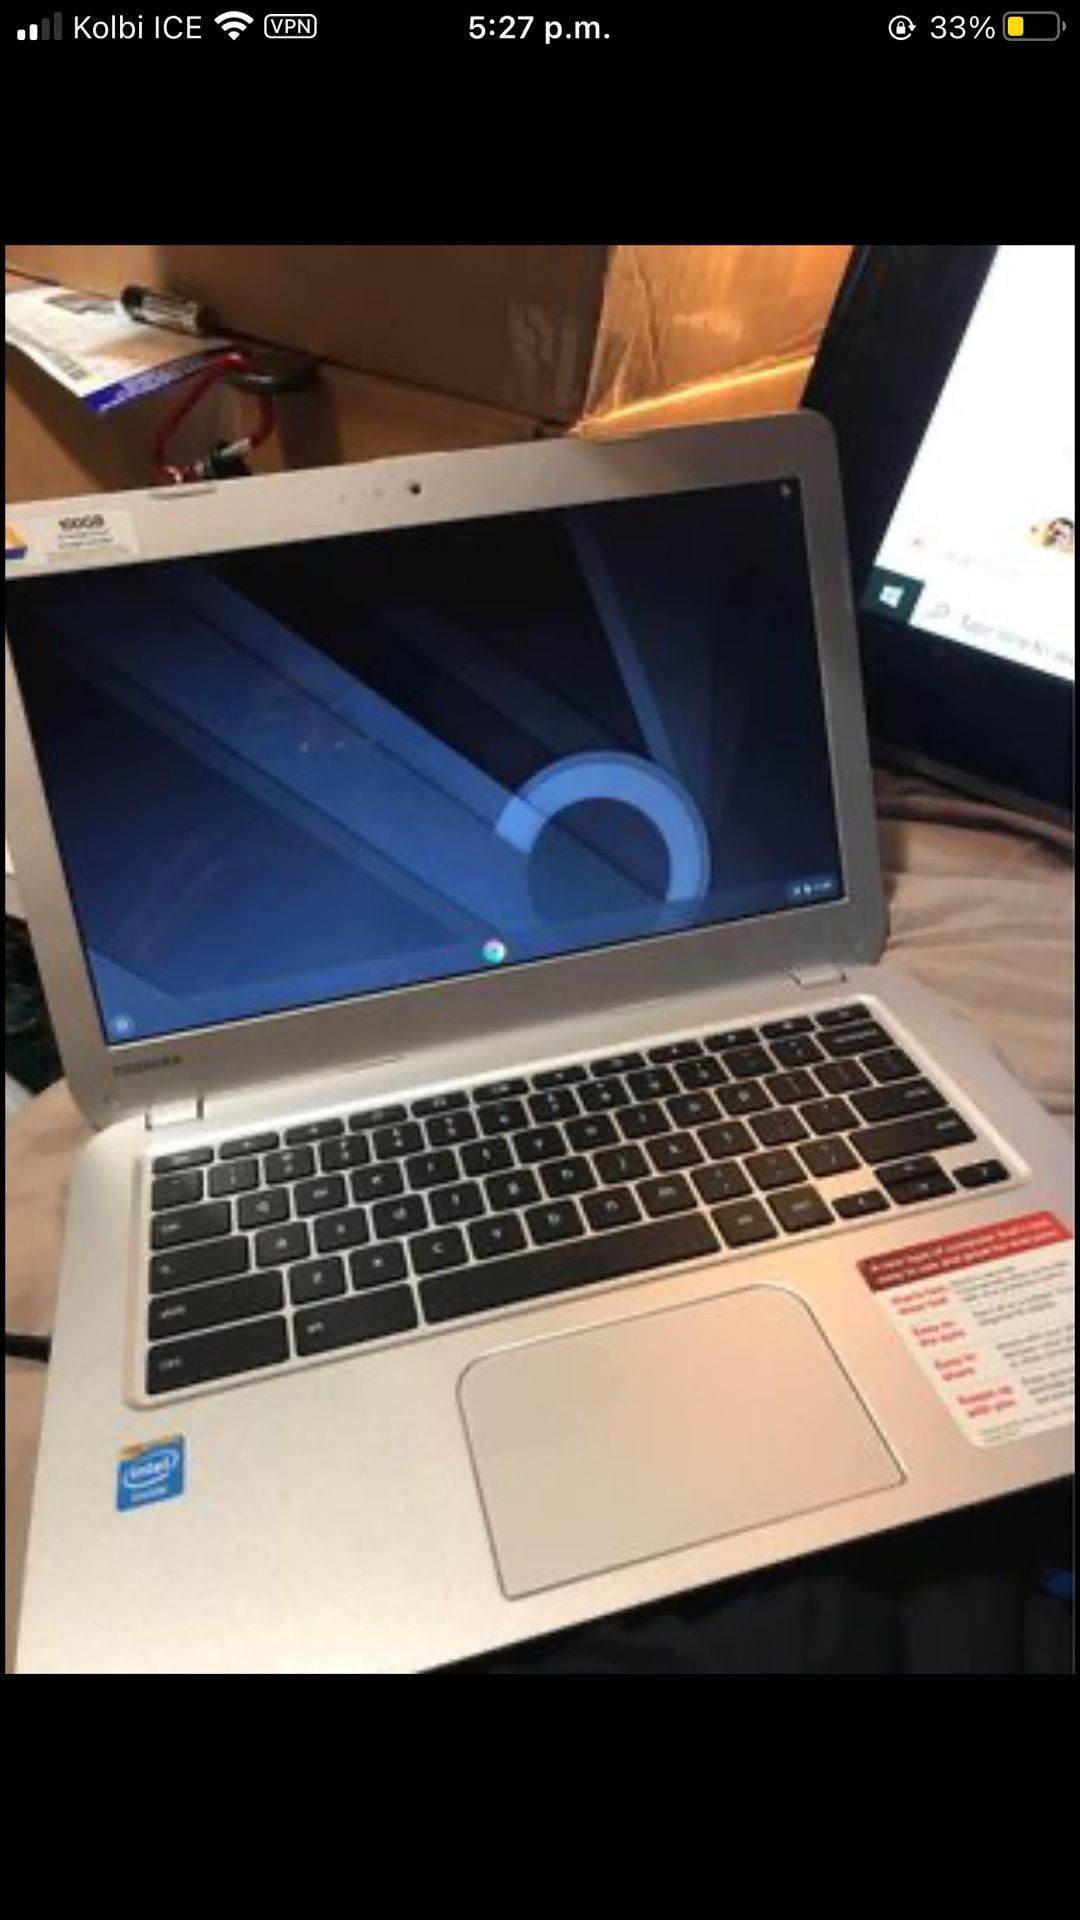 Laptop Toshiba 14” windows 10 2GB Ram 16GB SSD. HD webcam w/charger 4 available $119 All Clean